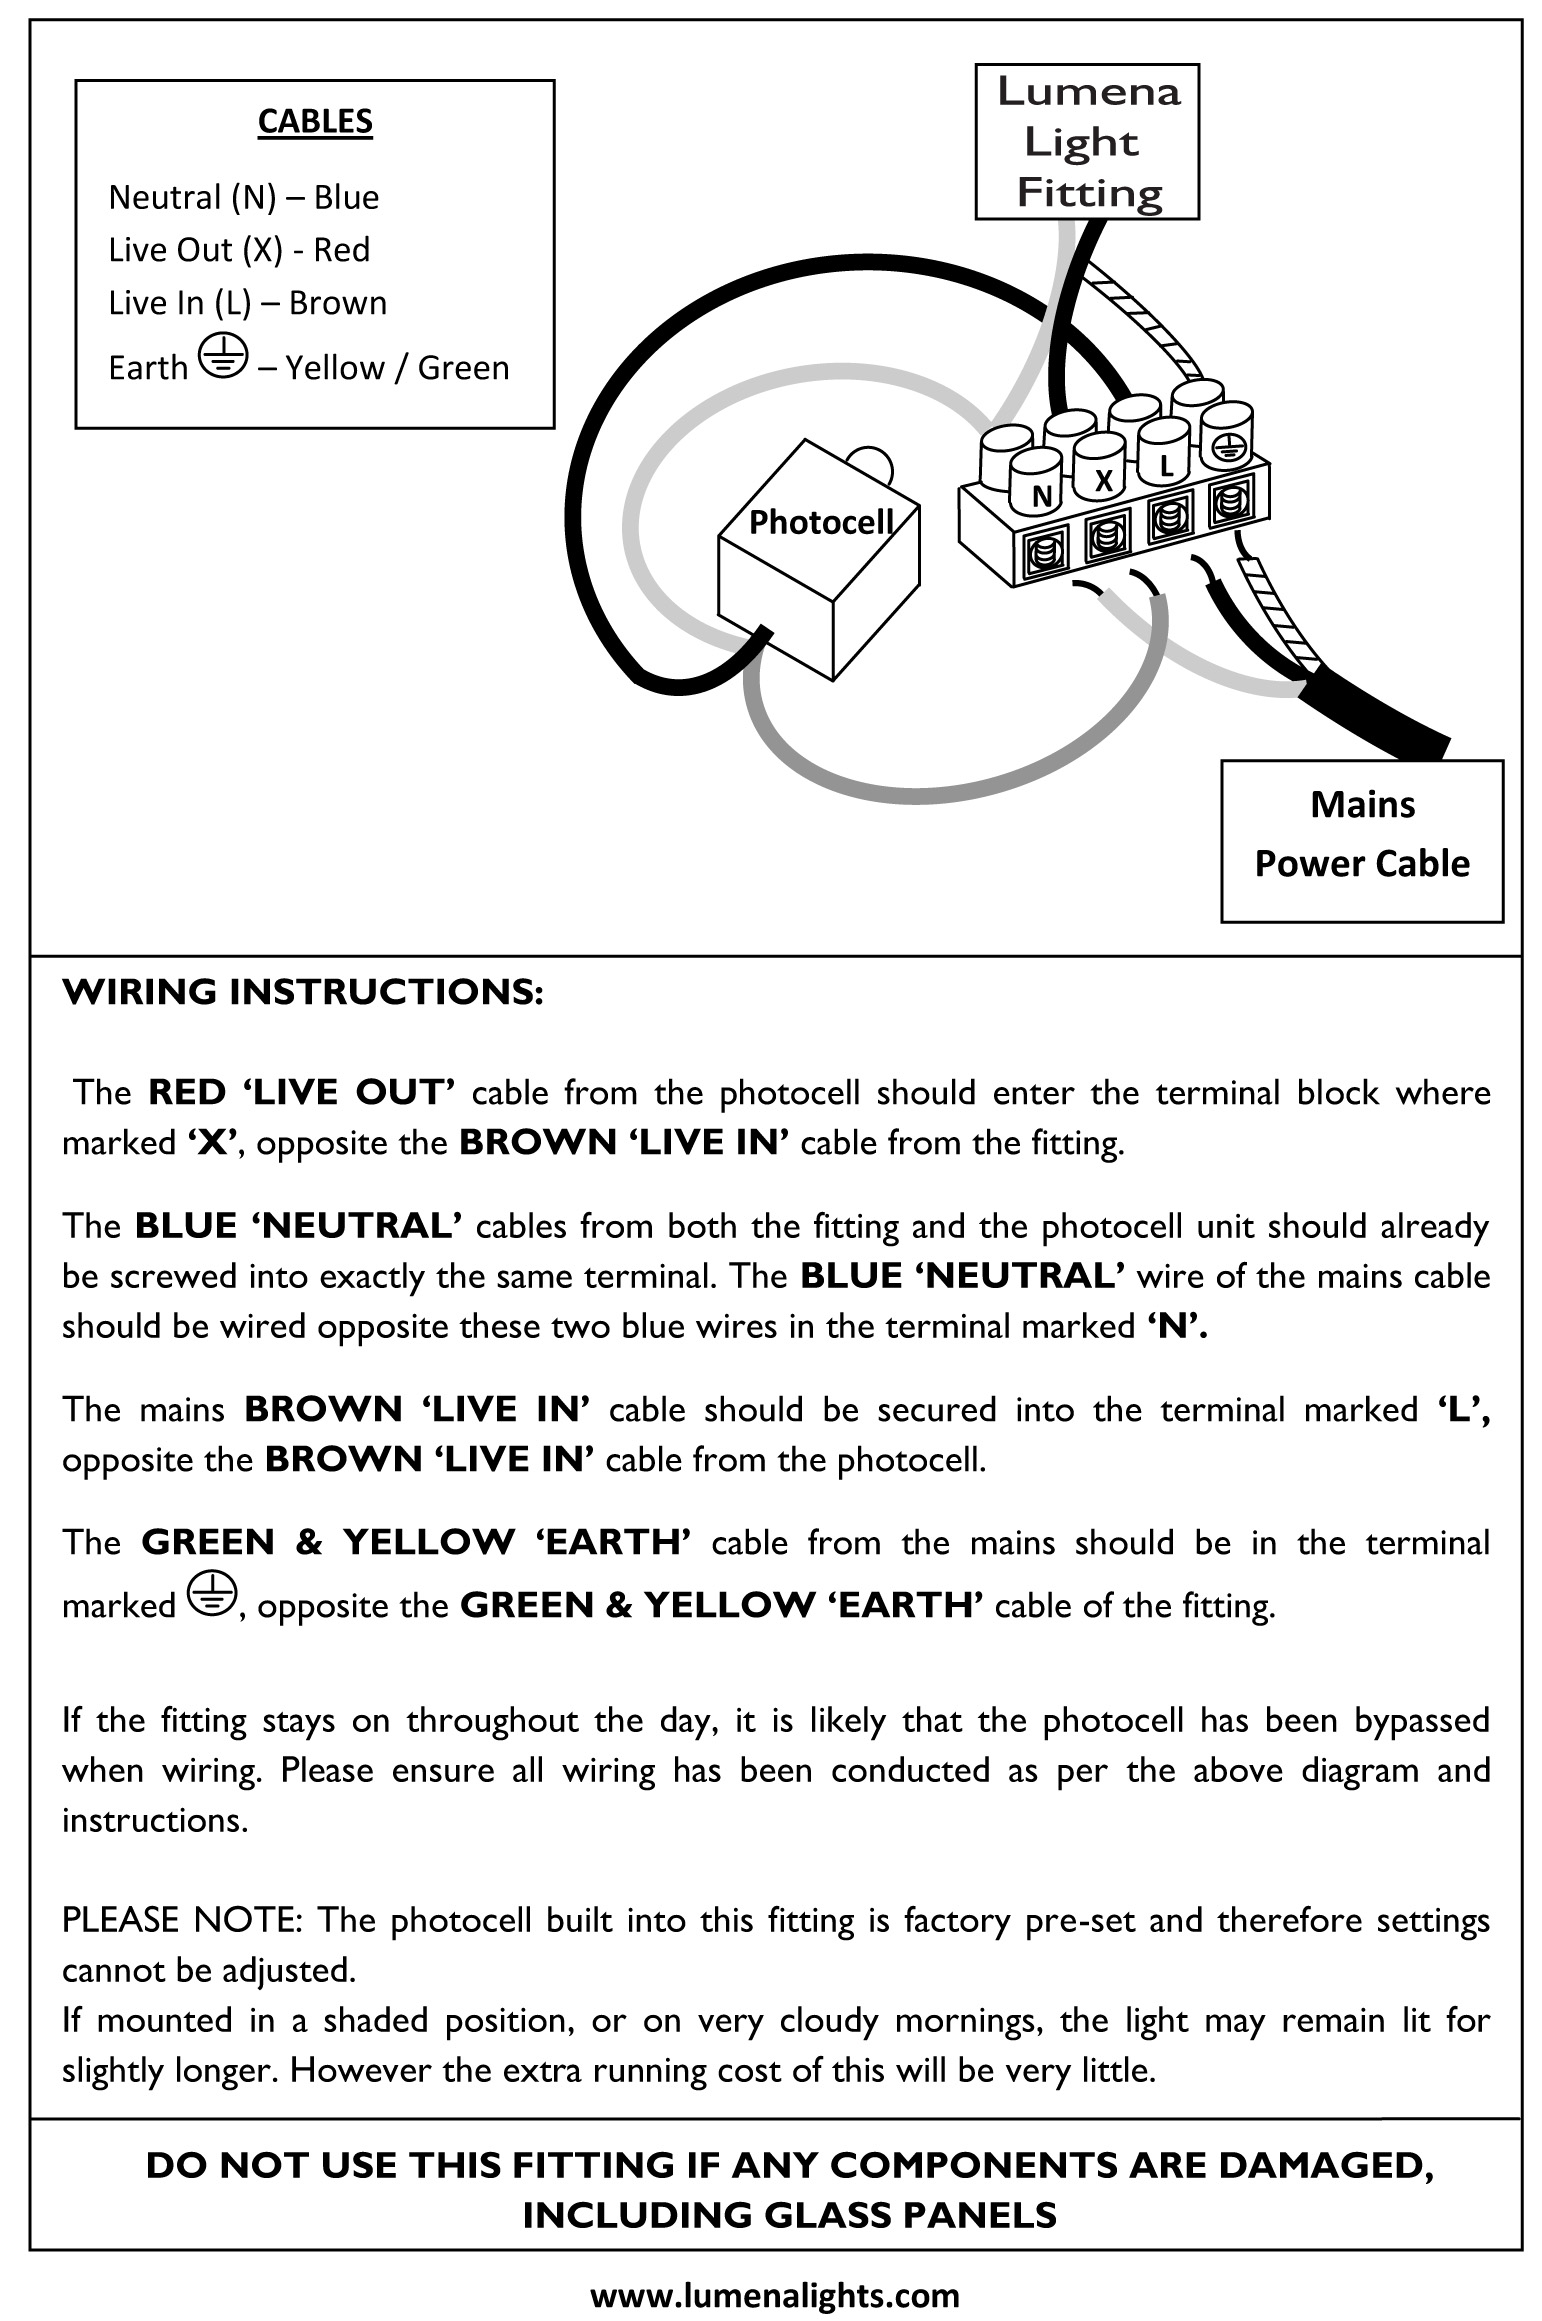 Security Light Wiring Diagram from www.lumenalights.com